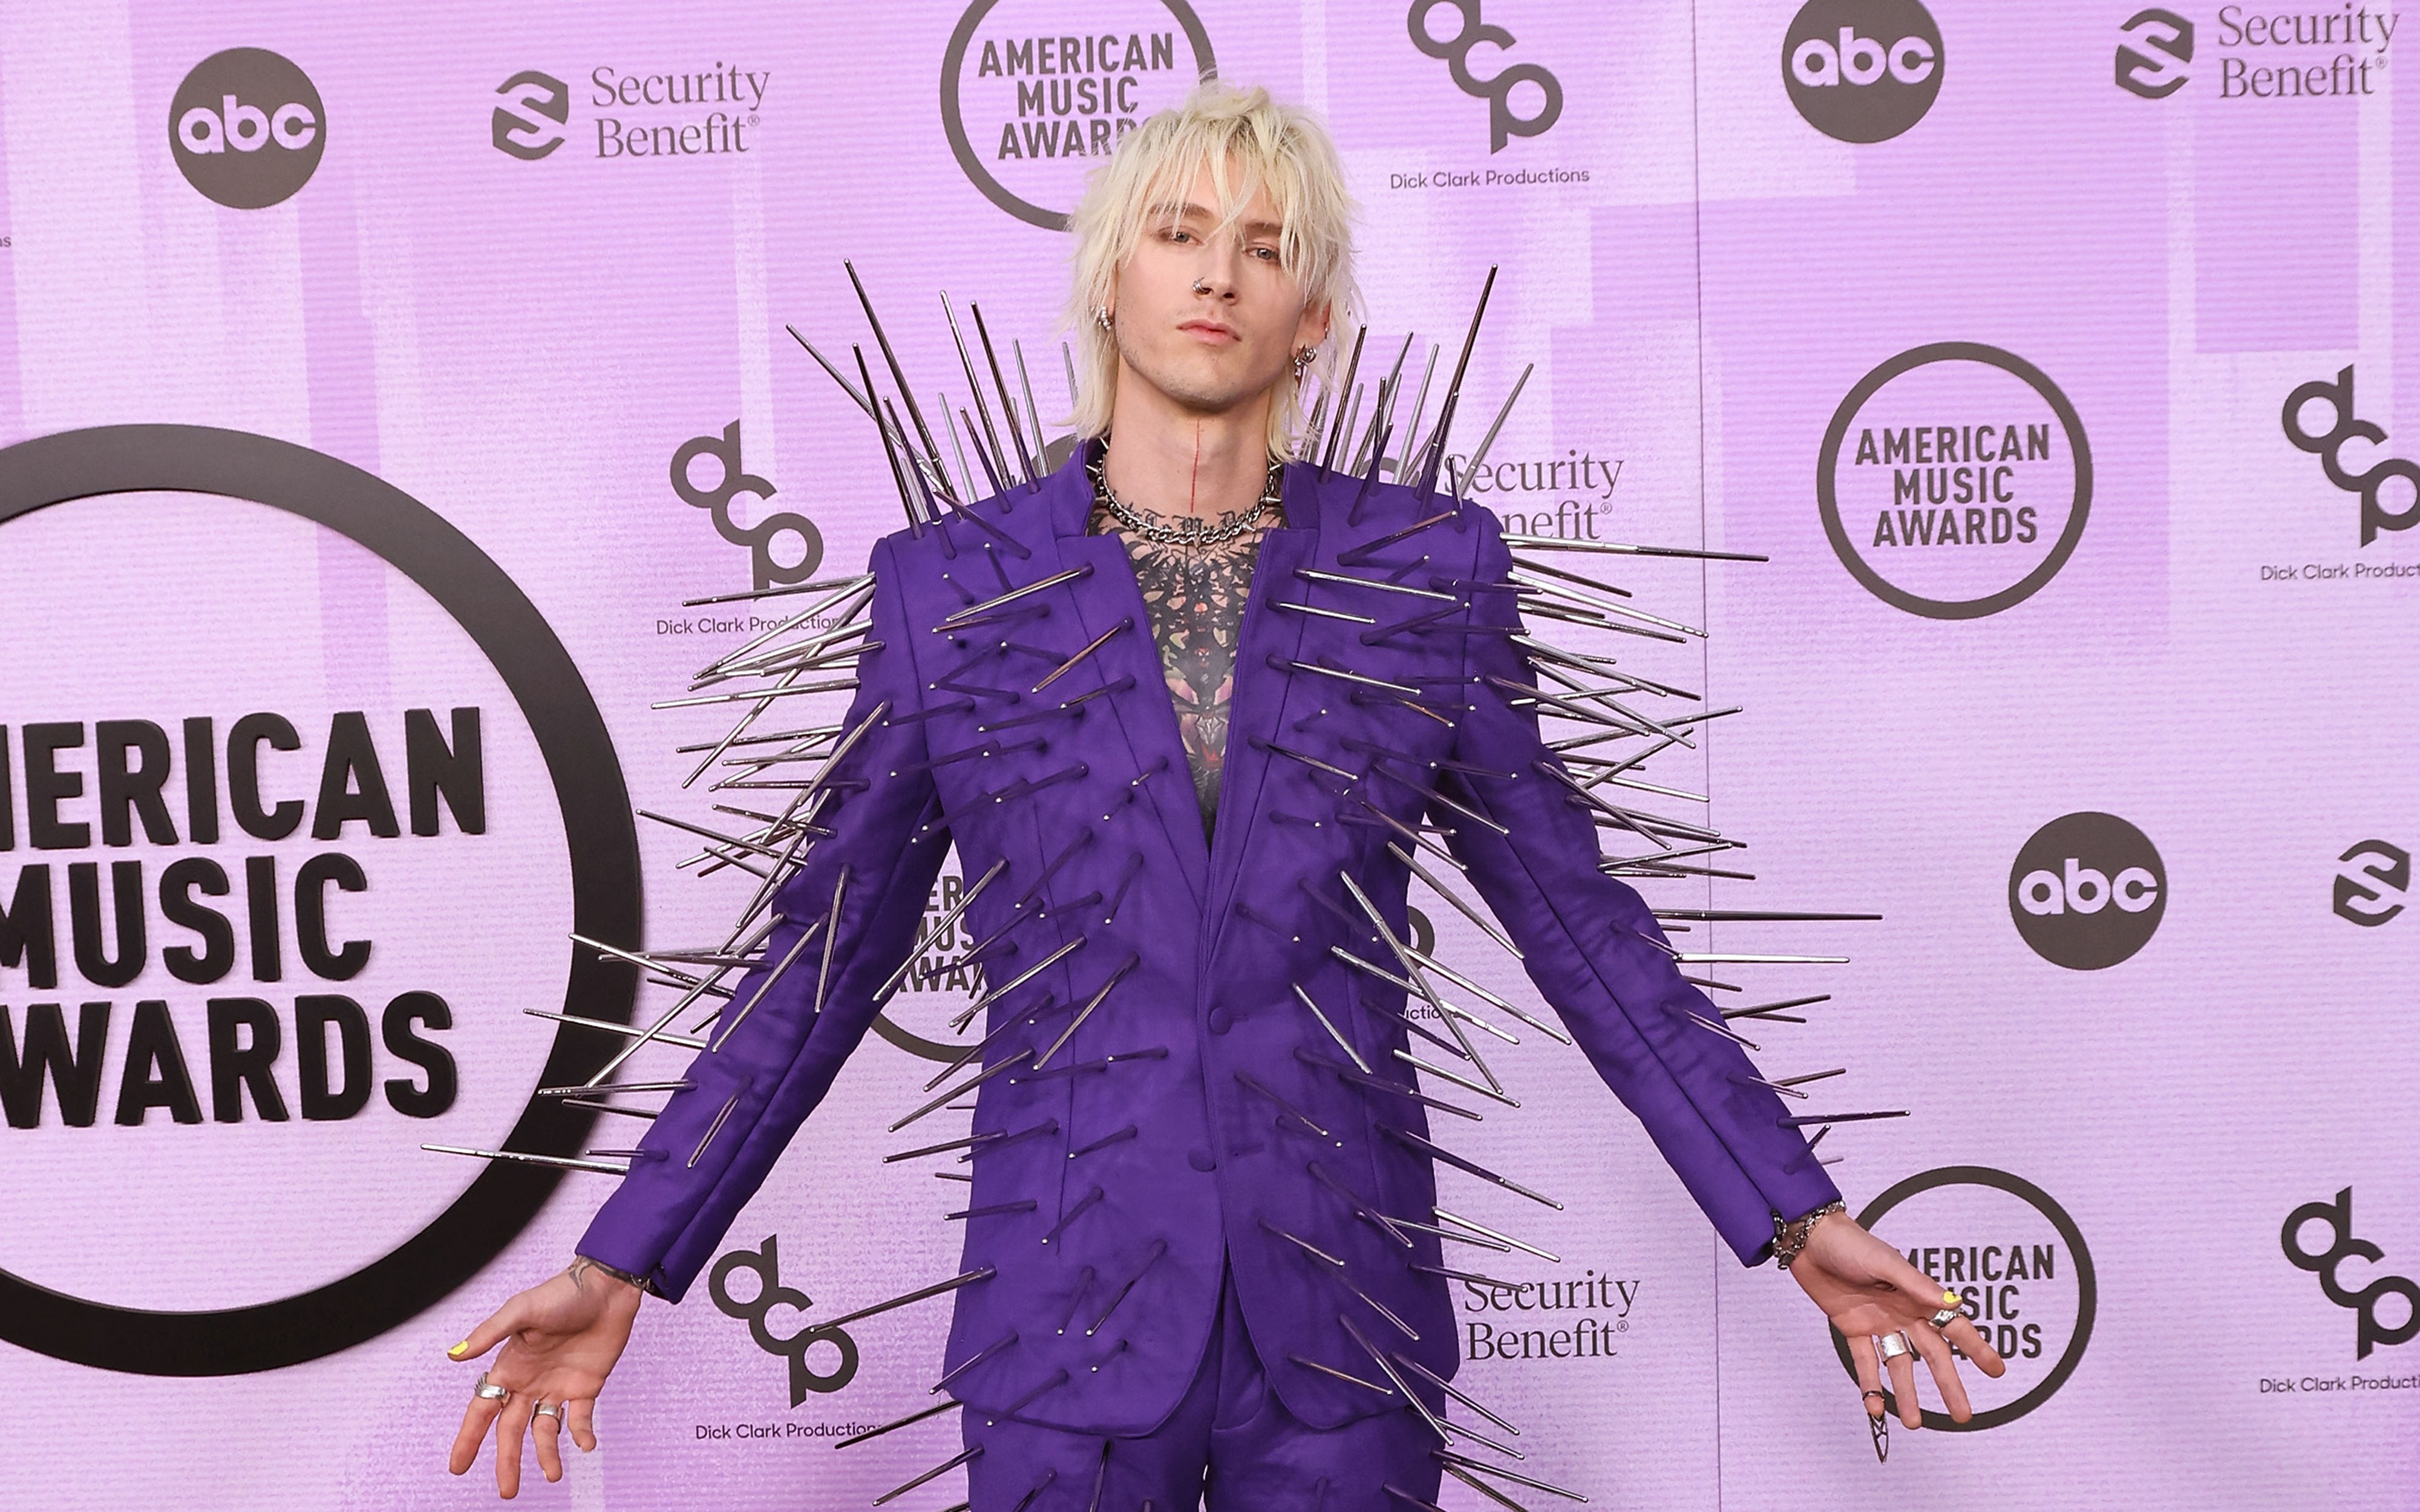 Machine Gun Kelly AMA Outfit: A Purple Suit Covered in Spikes